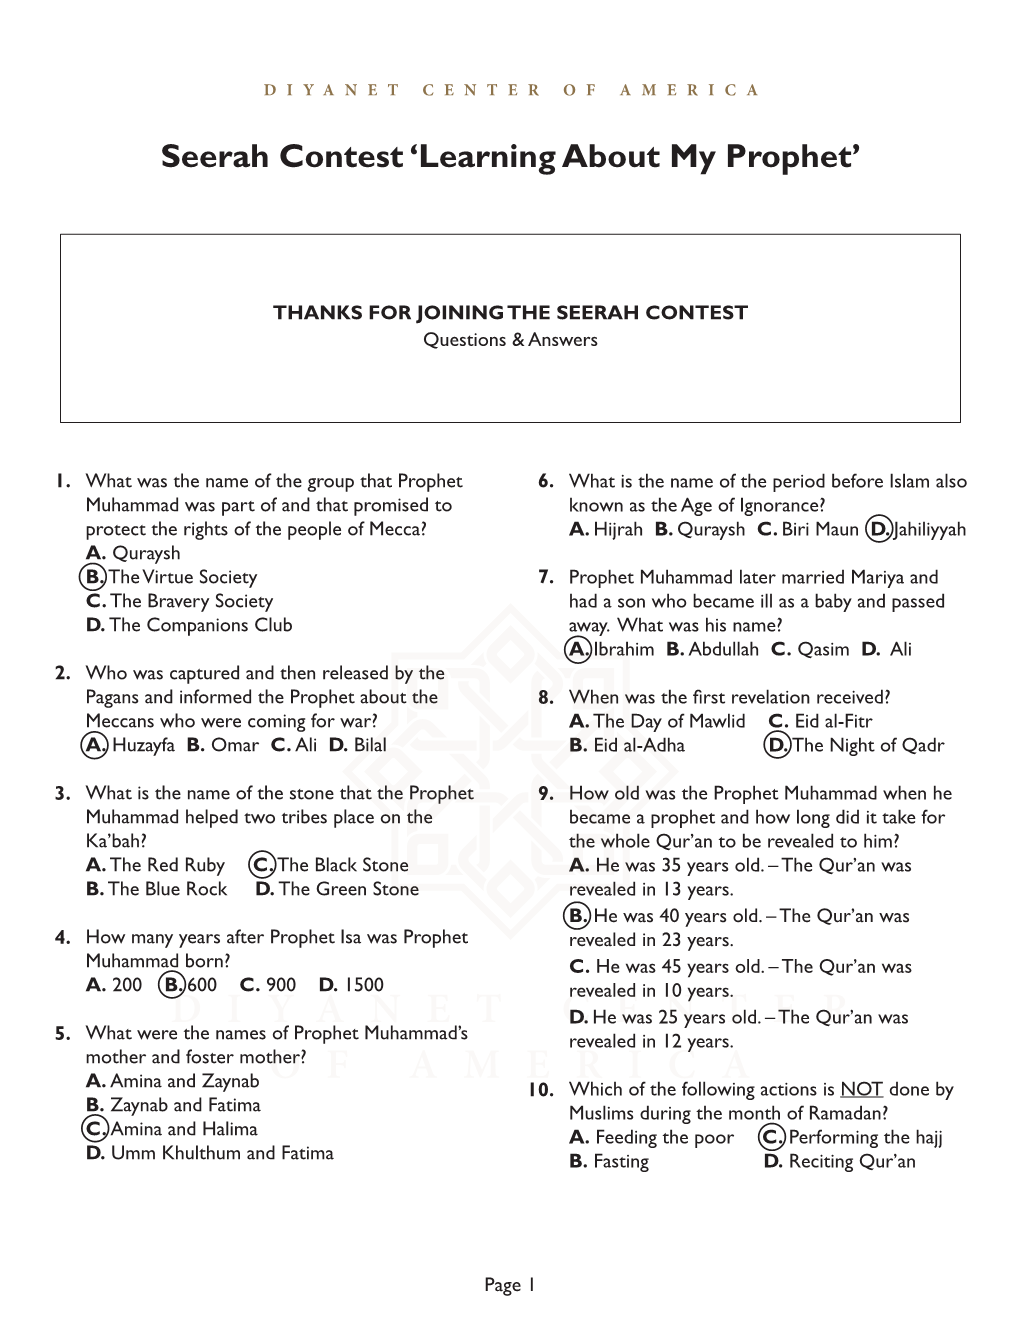 Seerah Contest 'Learning About My Prophet'